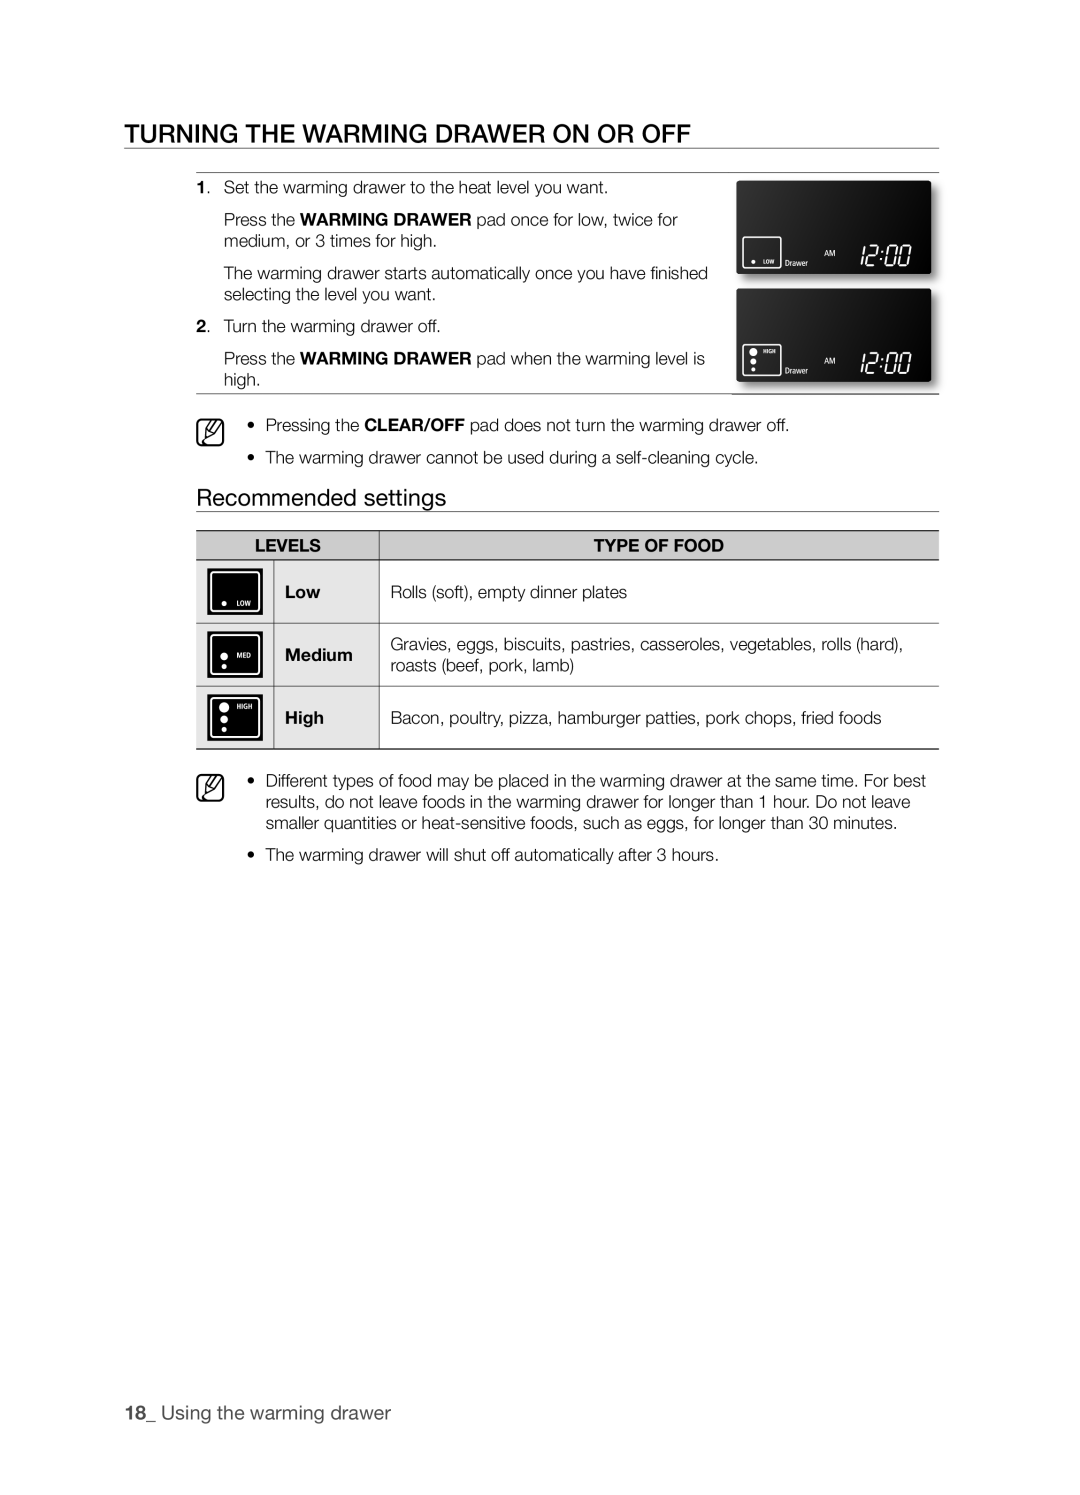 Samsung FTQ386LWX user manual Turning The Warming Drawer On Or Off, Recommended settings, 1_ Using the warming drawer 